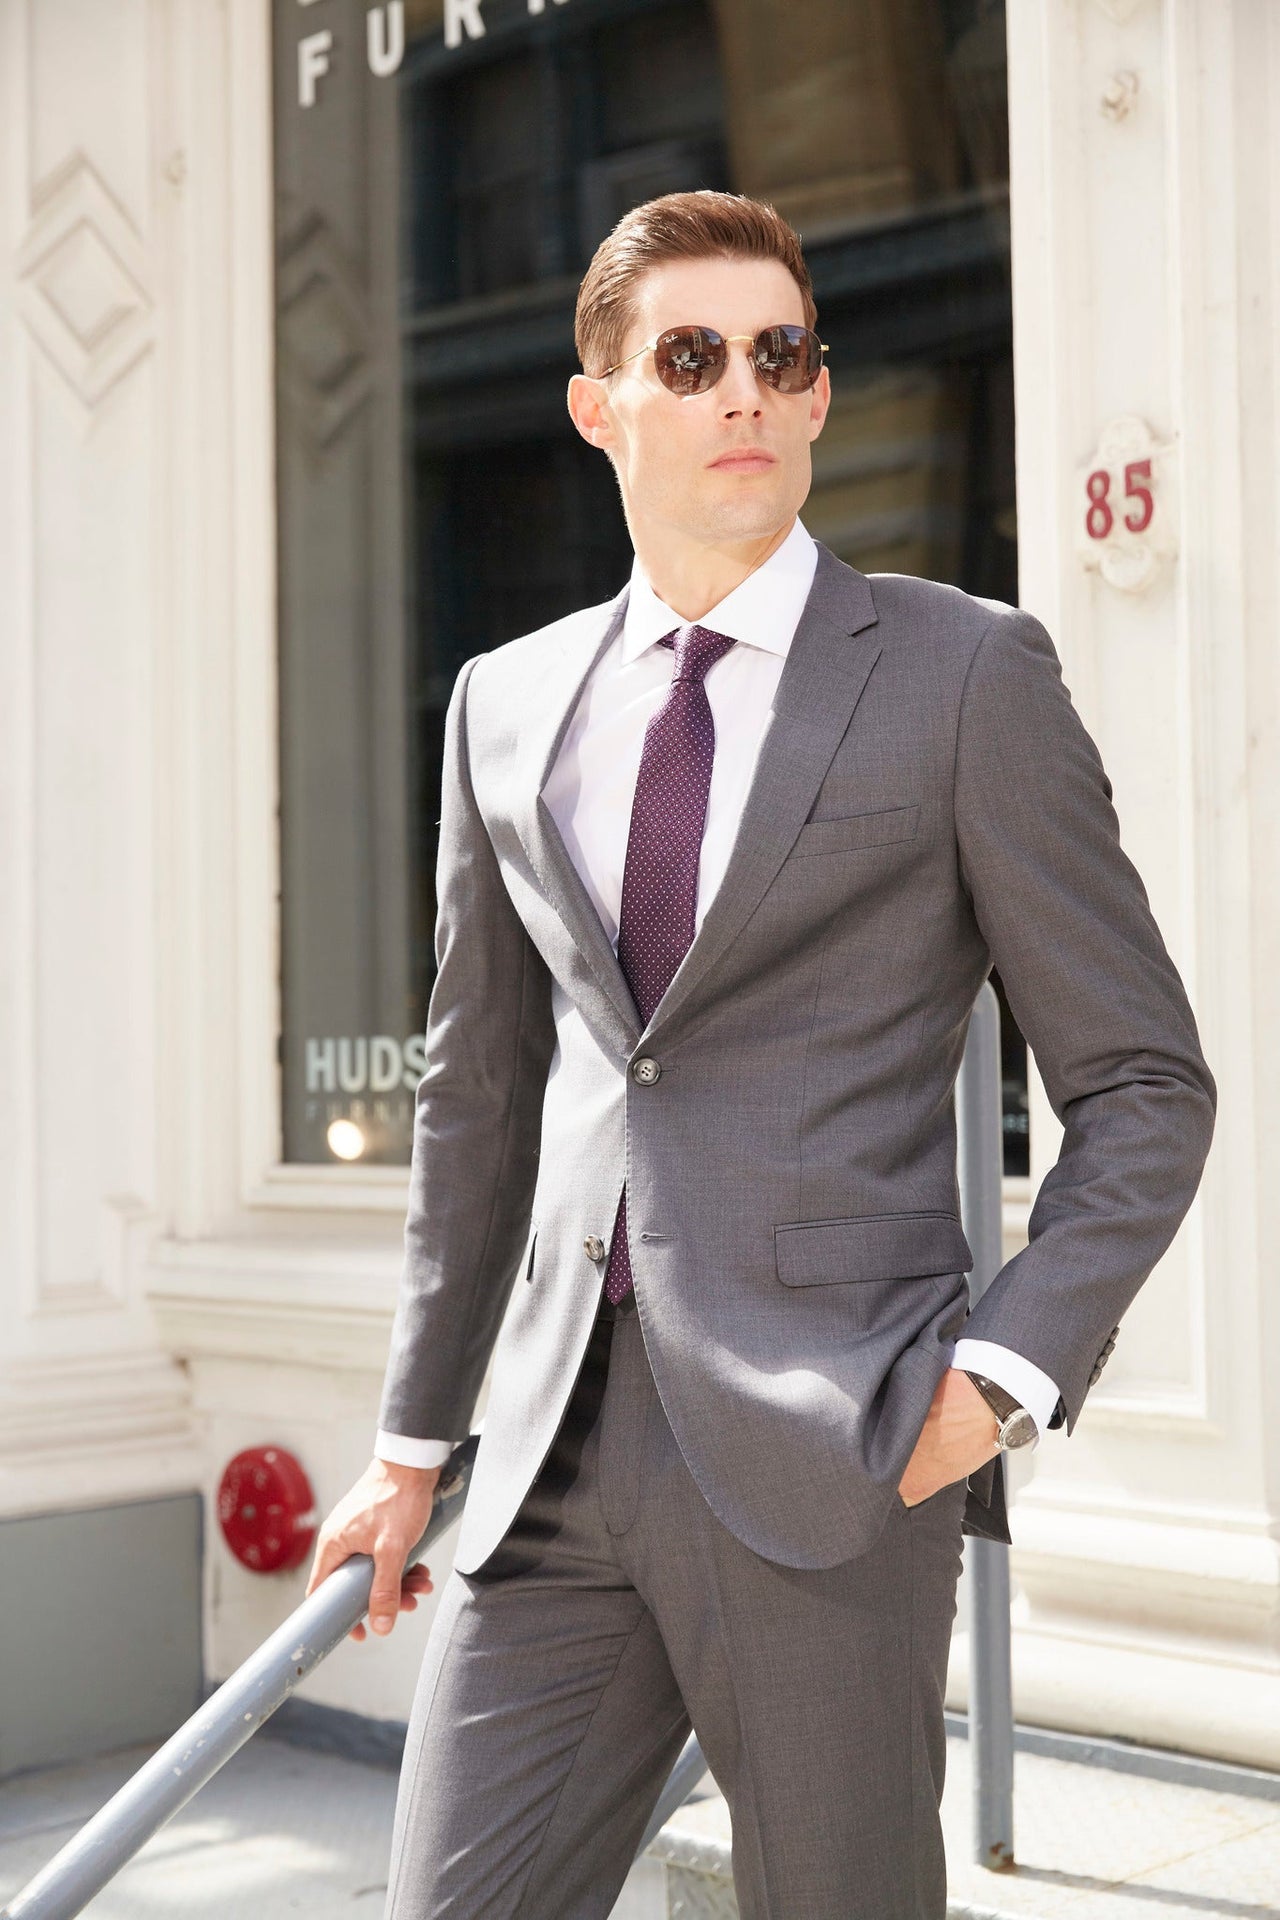 Medium Grey Suit  Buy A Modern Grey Wool Suit For Men From Tomasso Black –  Tomasso Black